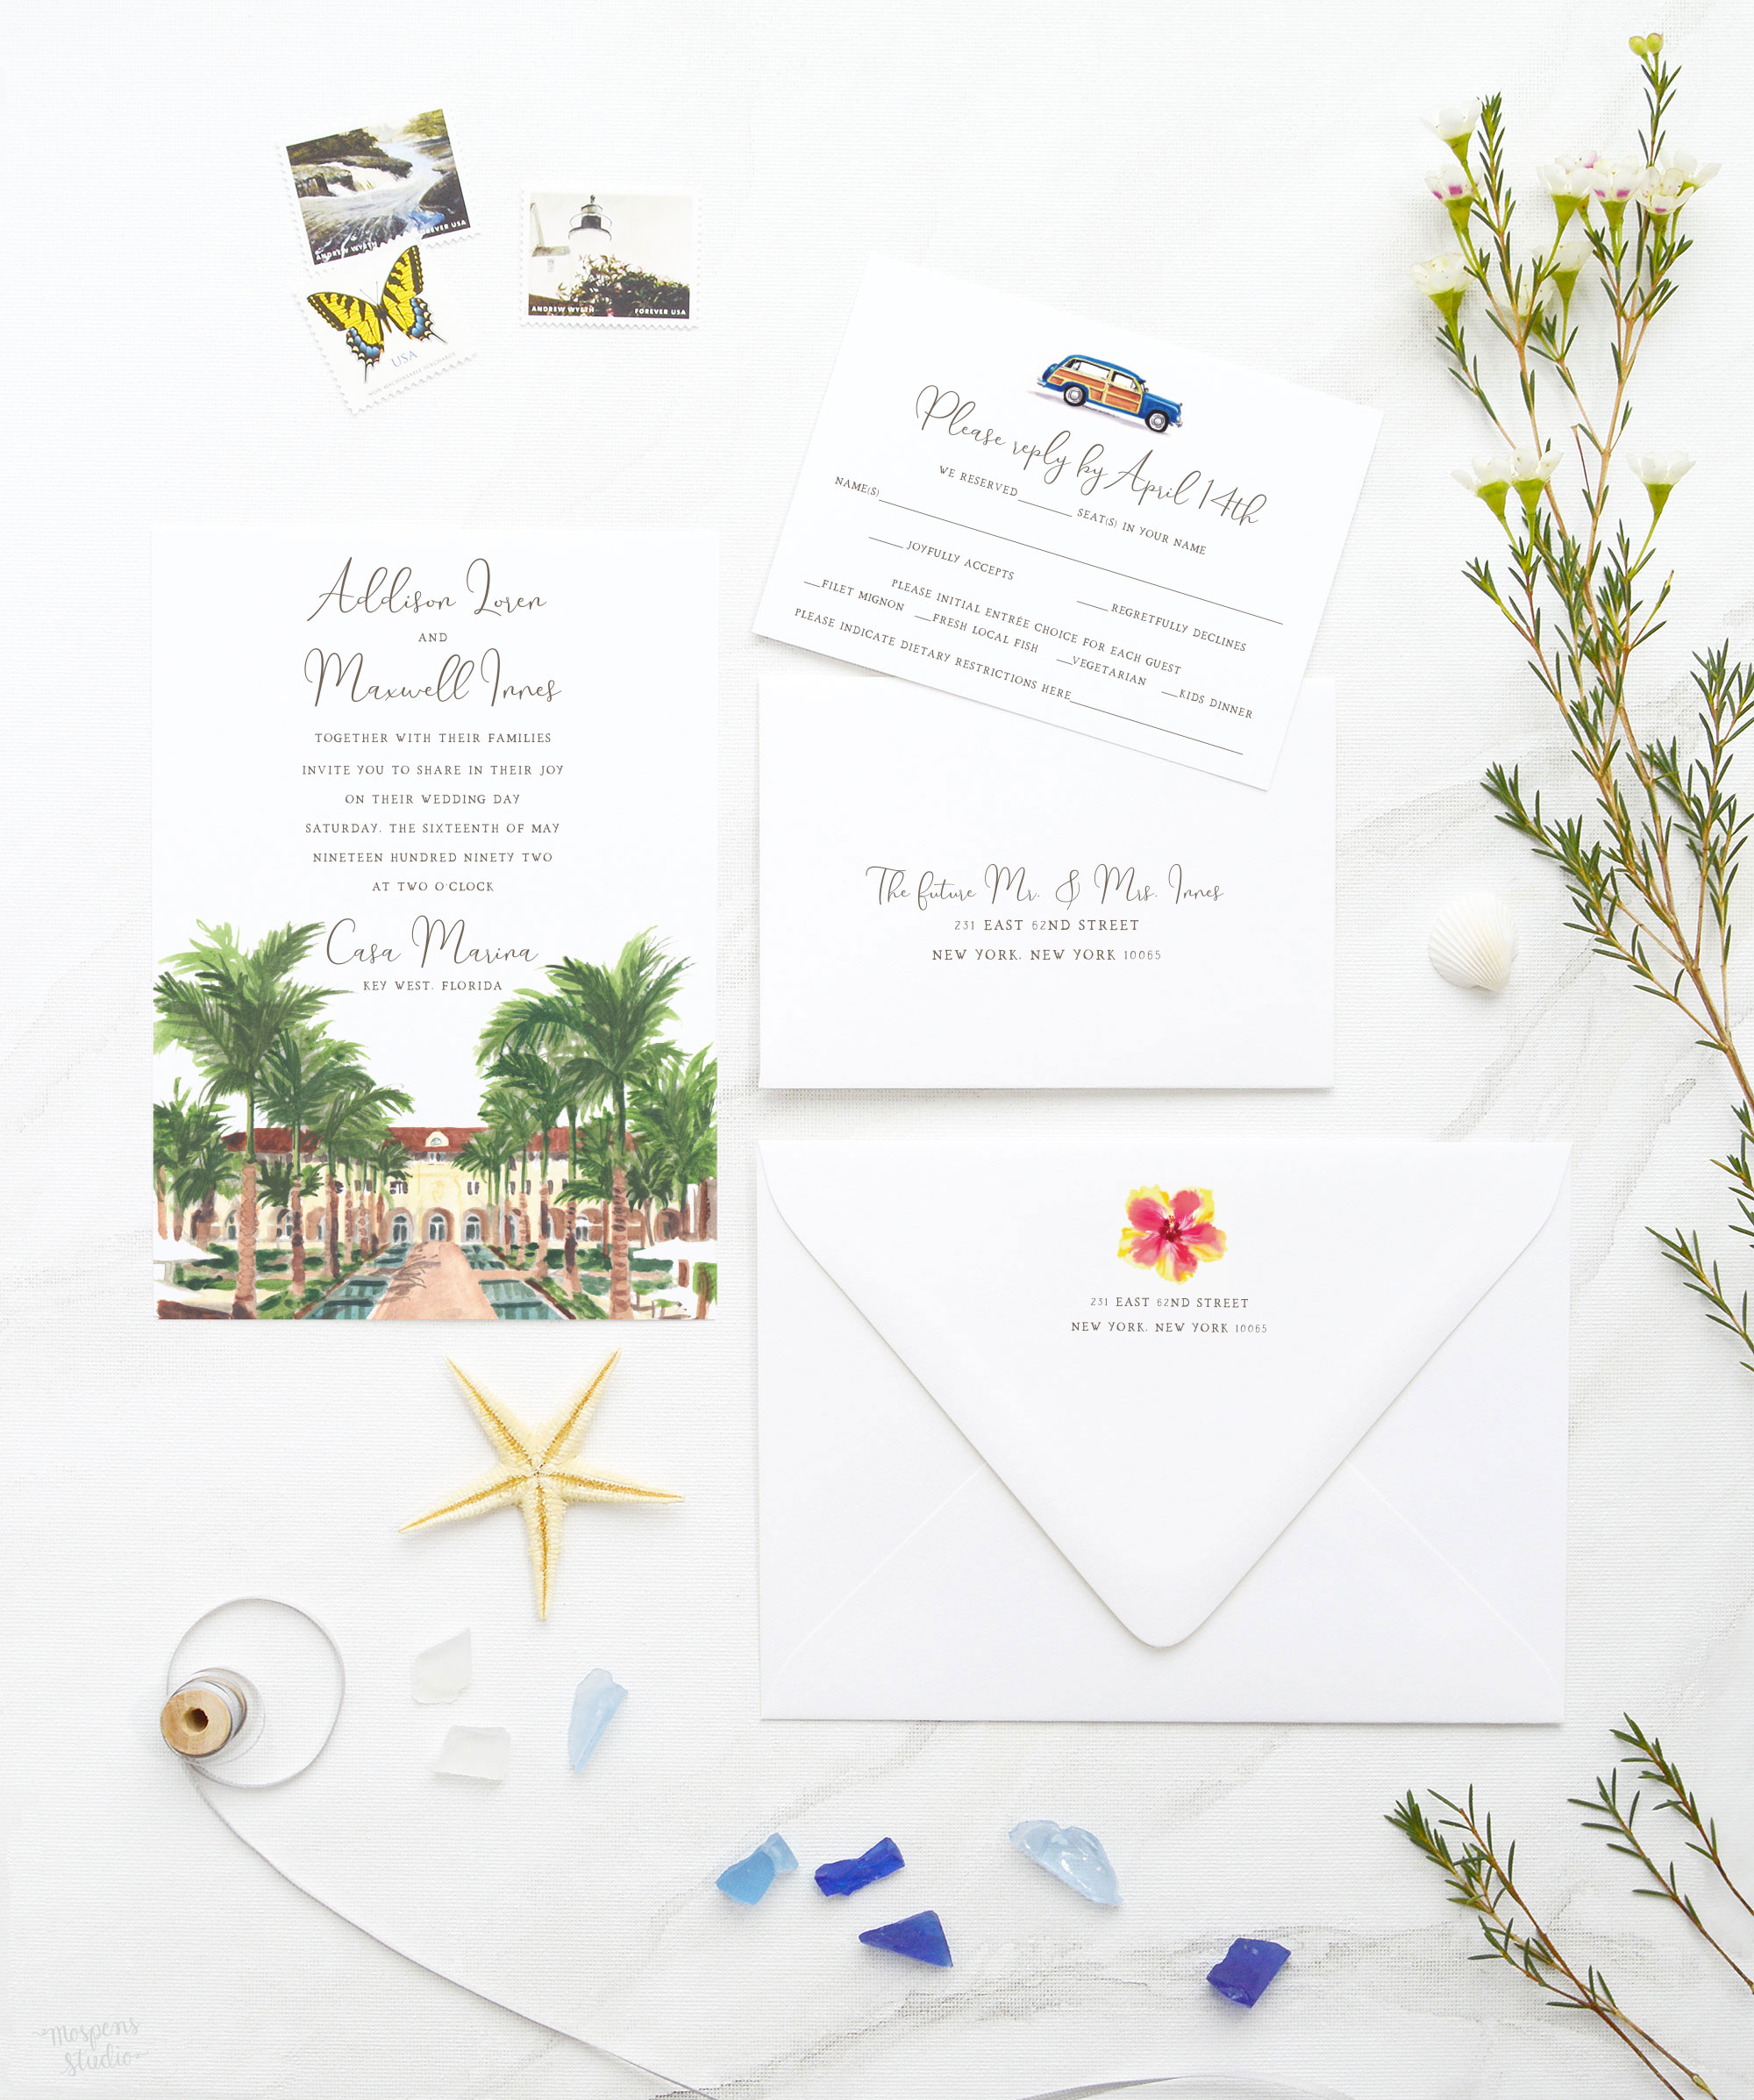 Casa Marina Key West Florida watercolor wedding invitation suite by artist Michelle Mospens. Painterly fun and beachy!